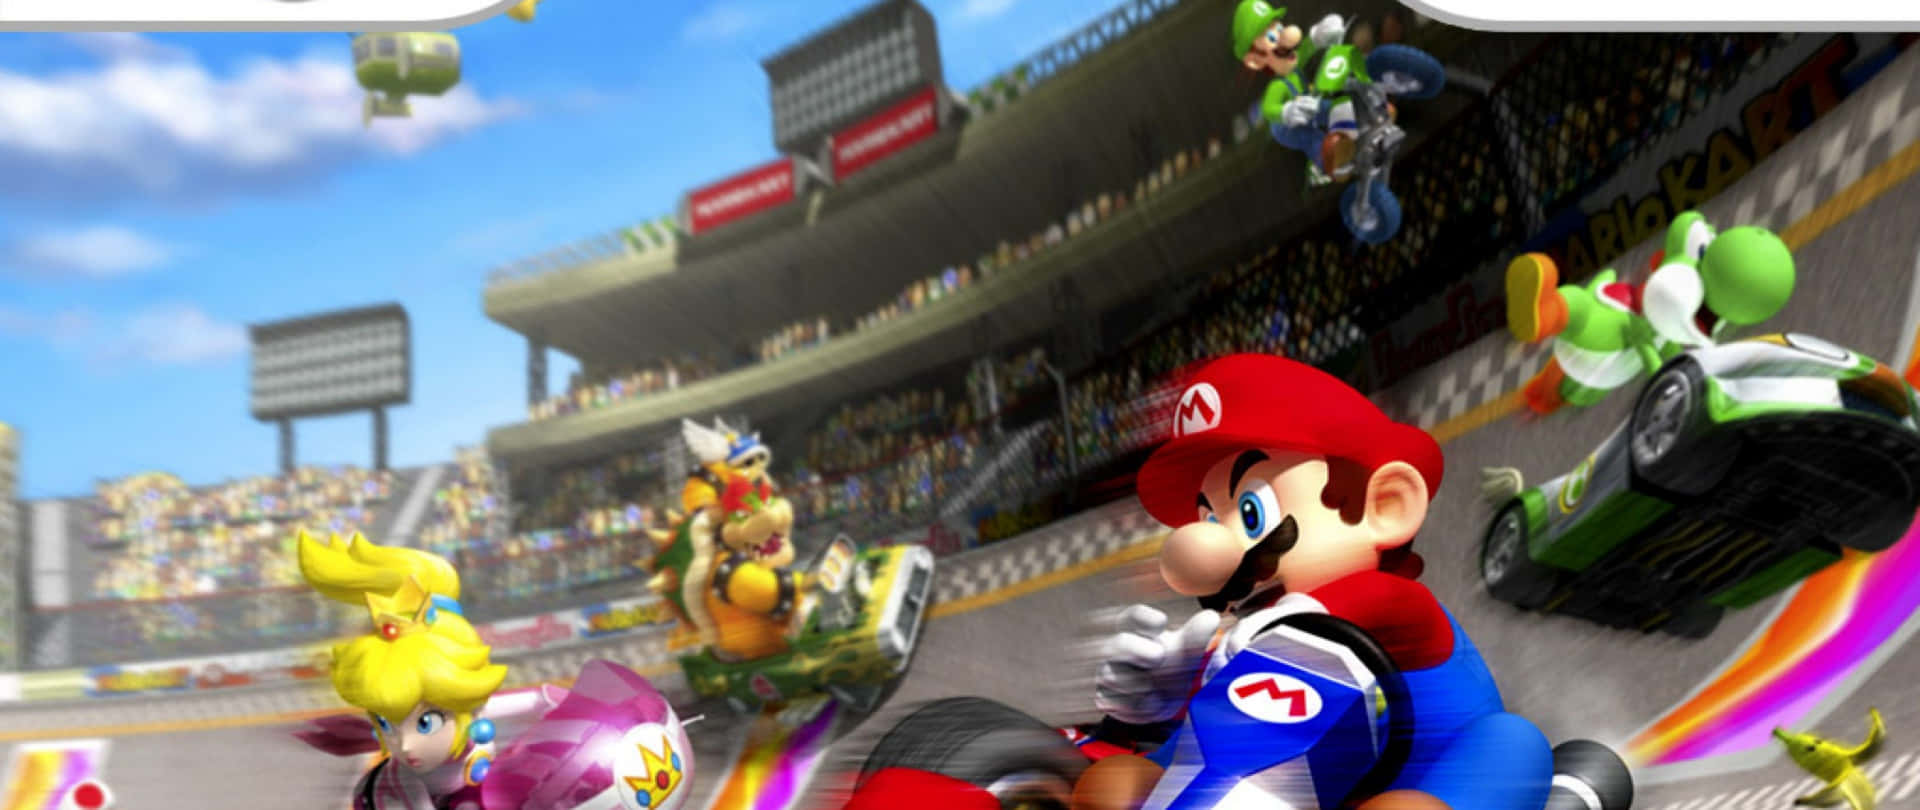 Fun and Fast! Join the Race with Mario Kart!